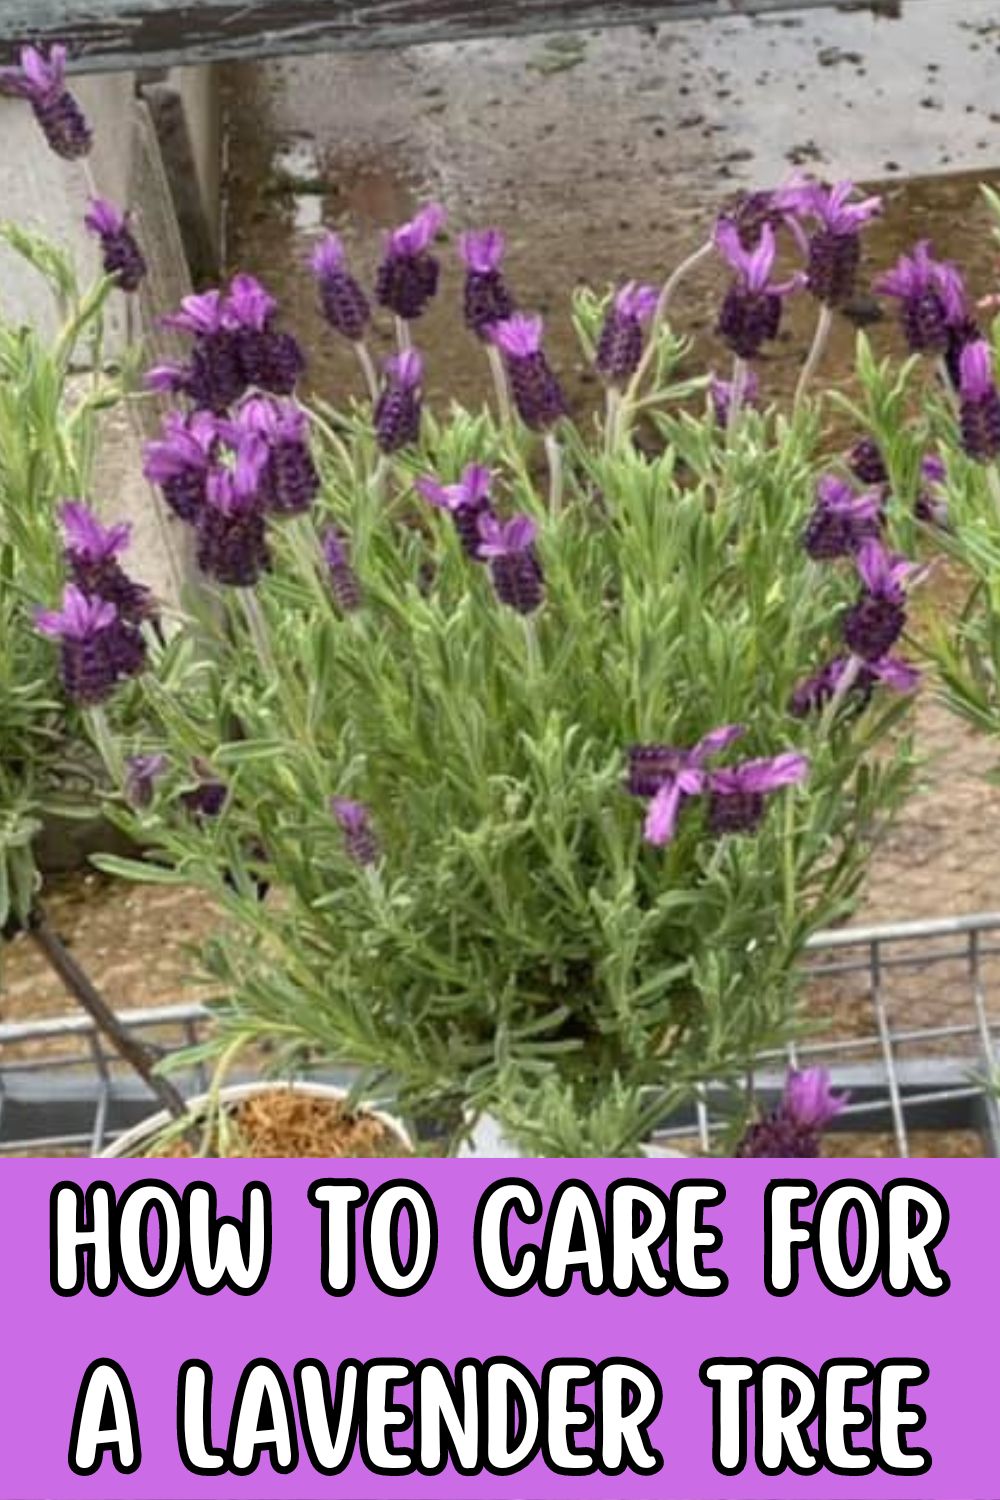 How to care for a lavender tree.